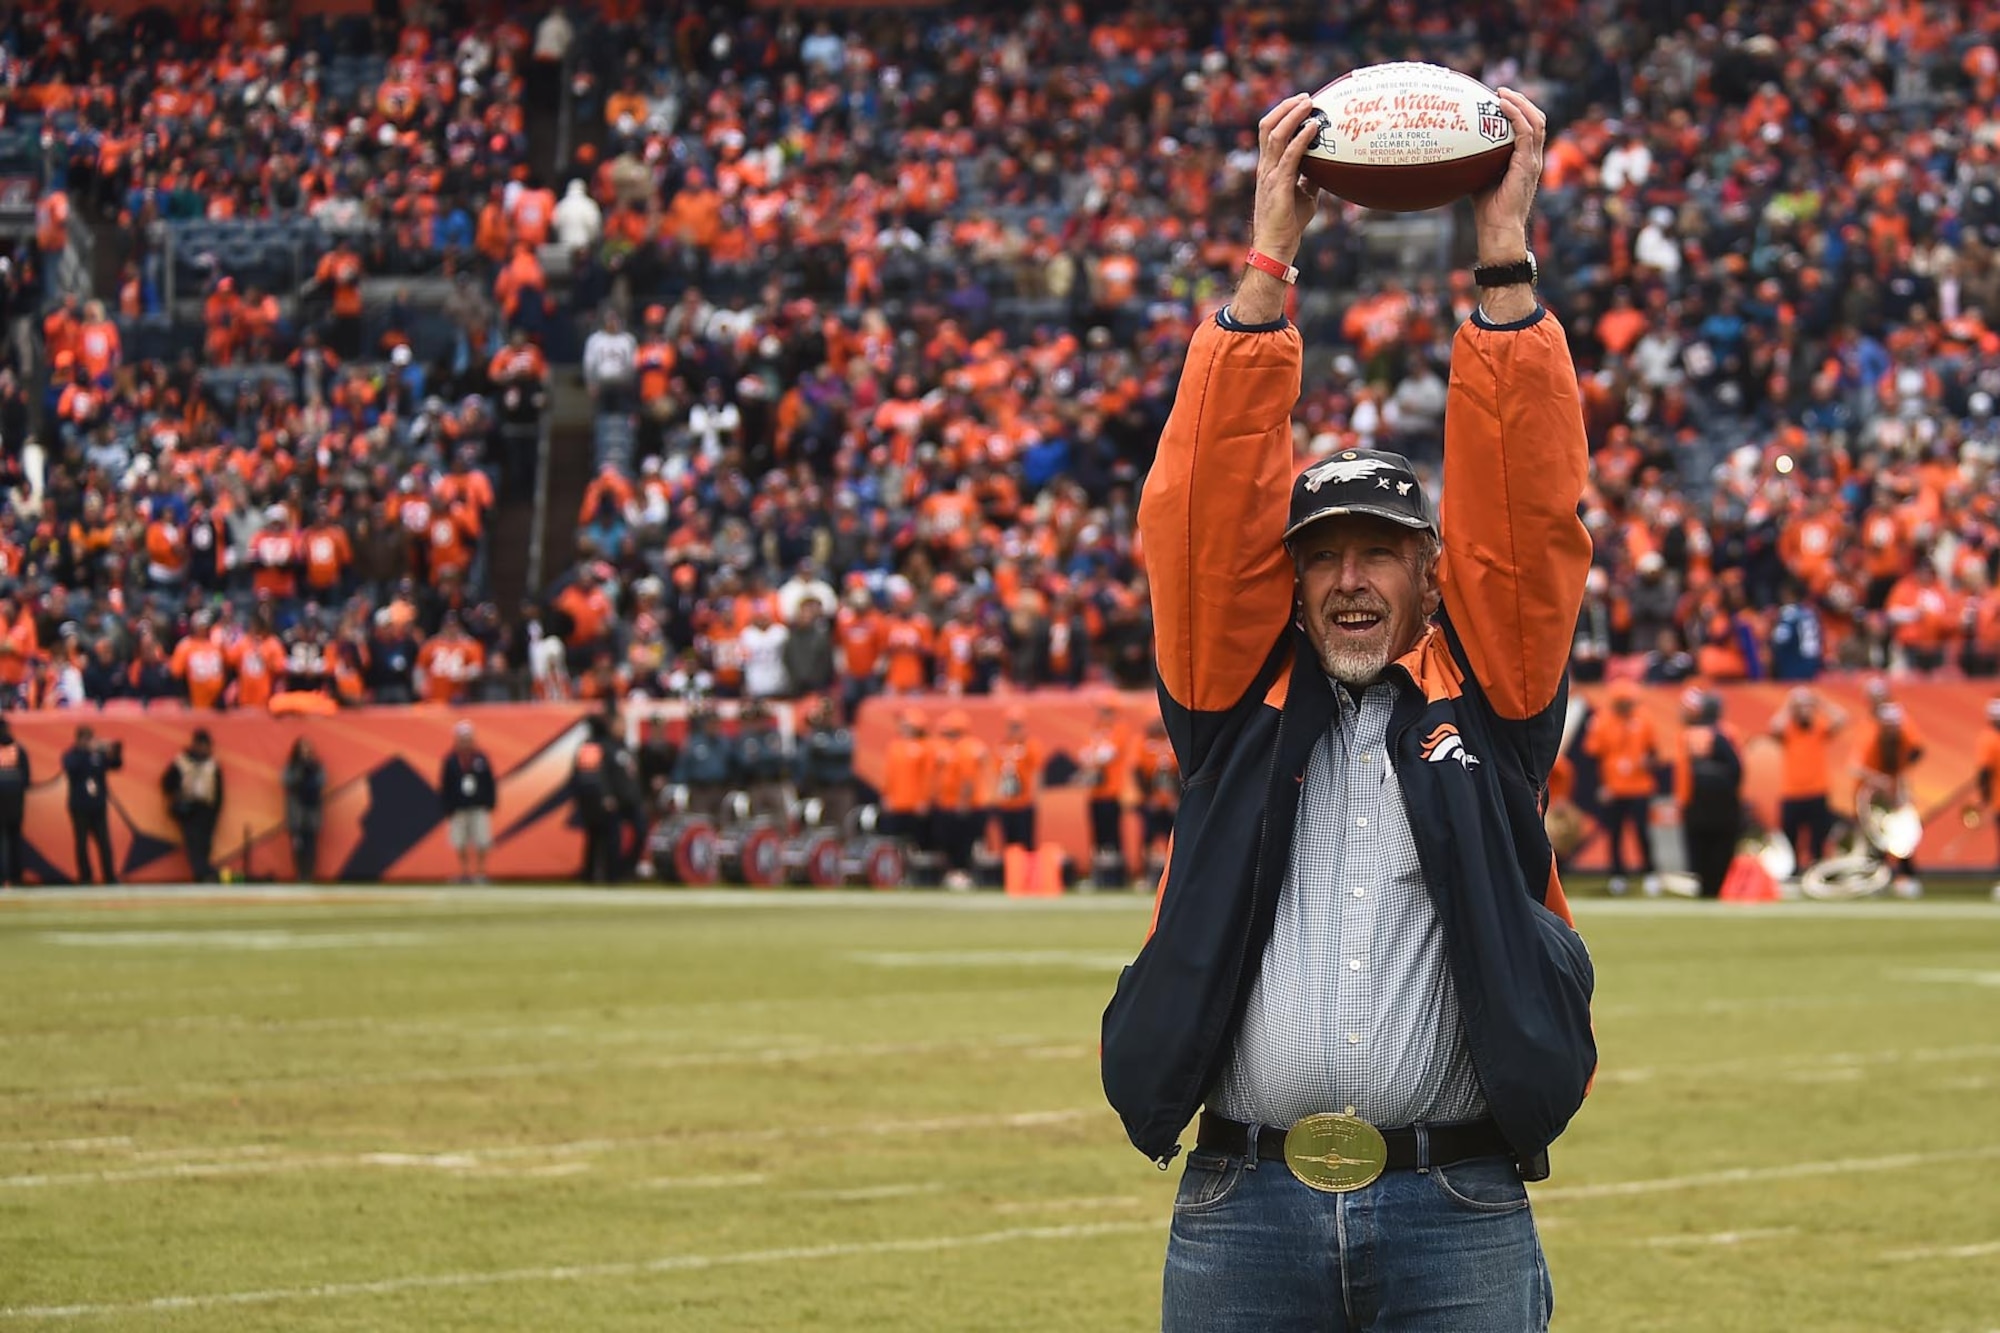 William “Ham” DuBois, the father of Capt. William H. DuBois, raises the game ball in front of thousands of cheering fans Jan. 11, 2015, at Sports Authority Field in Denver. The family of the fallen pilot, Capt. DuBois, was presented the game ball before the Denver Broncos playoff game to honor his service and sacrifice. (U.S. Air Force photo by Airman 1st Class Luke W. Nowakowski/Released) 